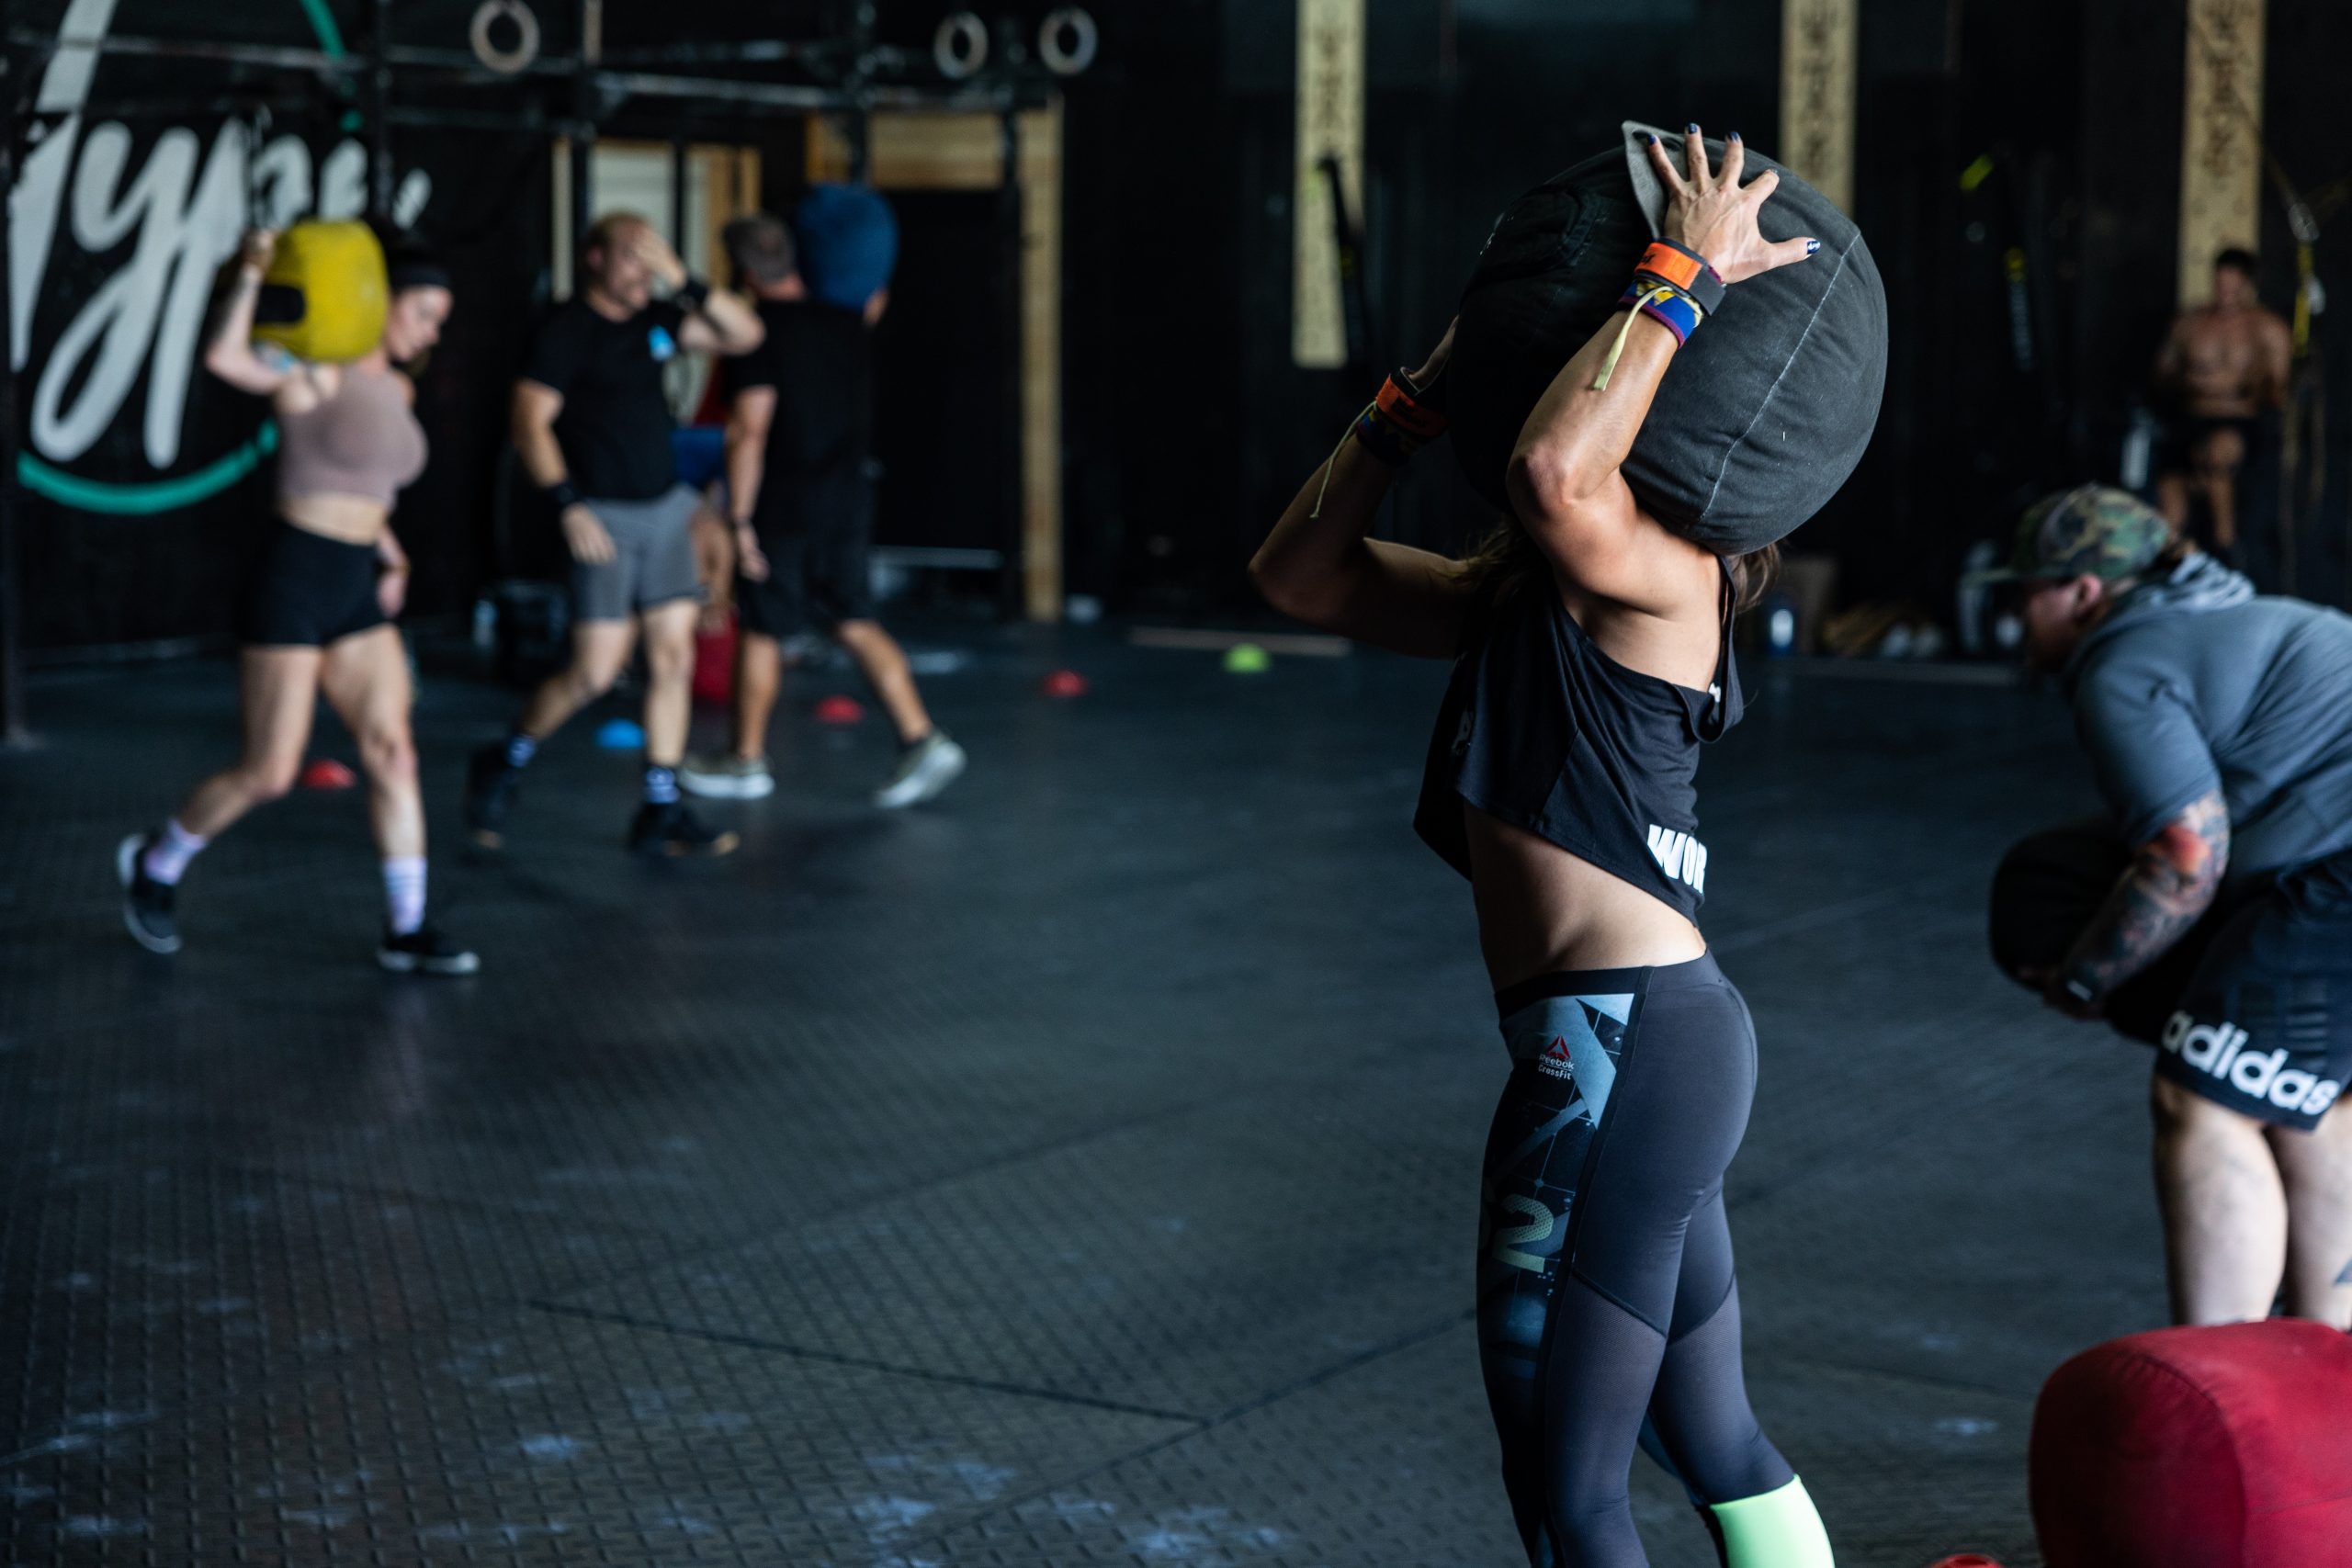 Temperance Training student carries care weight over her shoulder during CrossFit training class